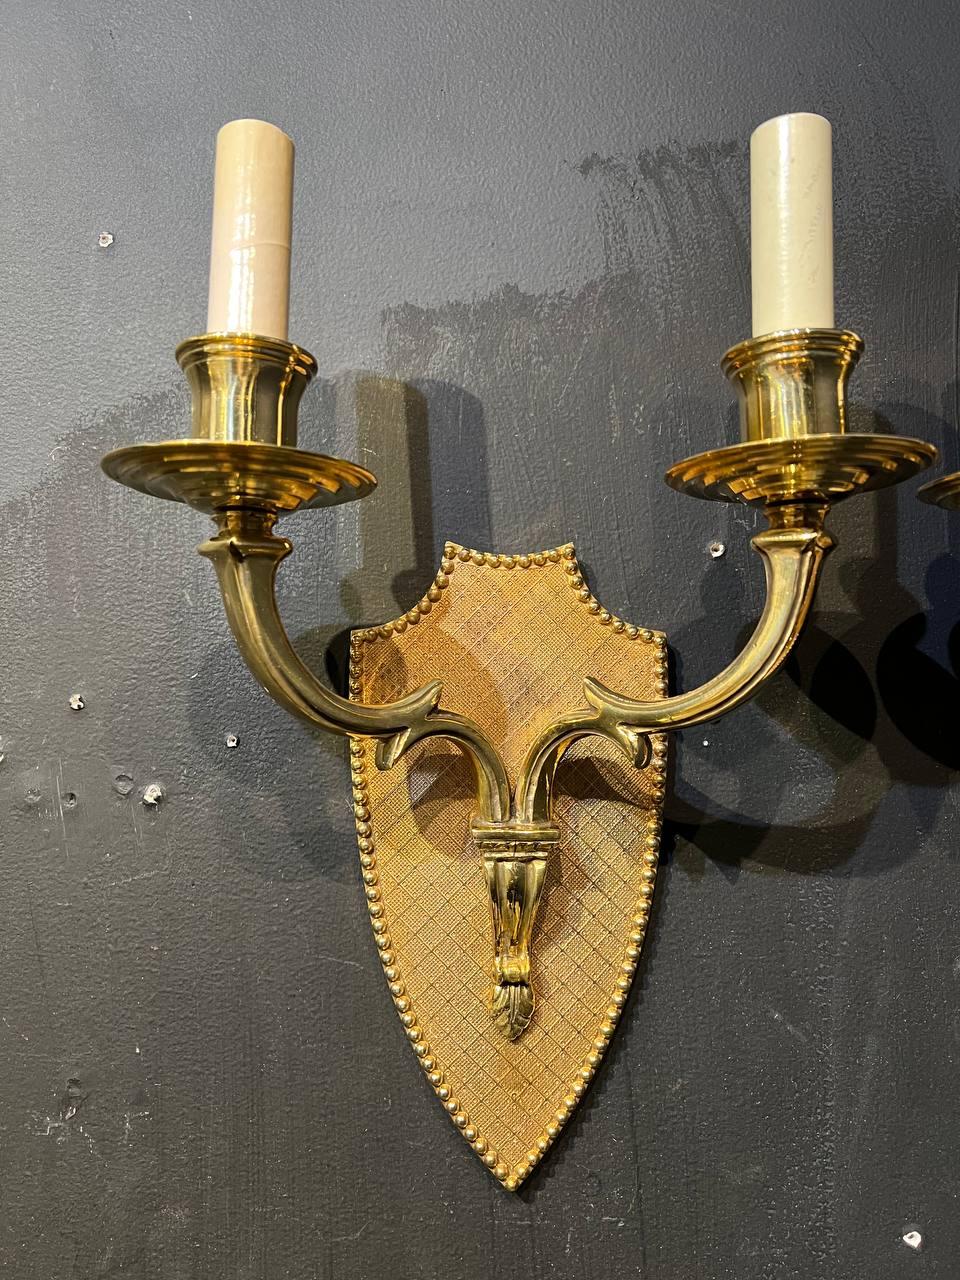 Pair of circa 1900's Caldwell gilt bronze engraved sconces with 2 lights